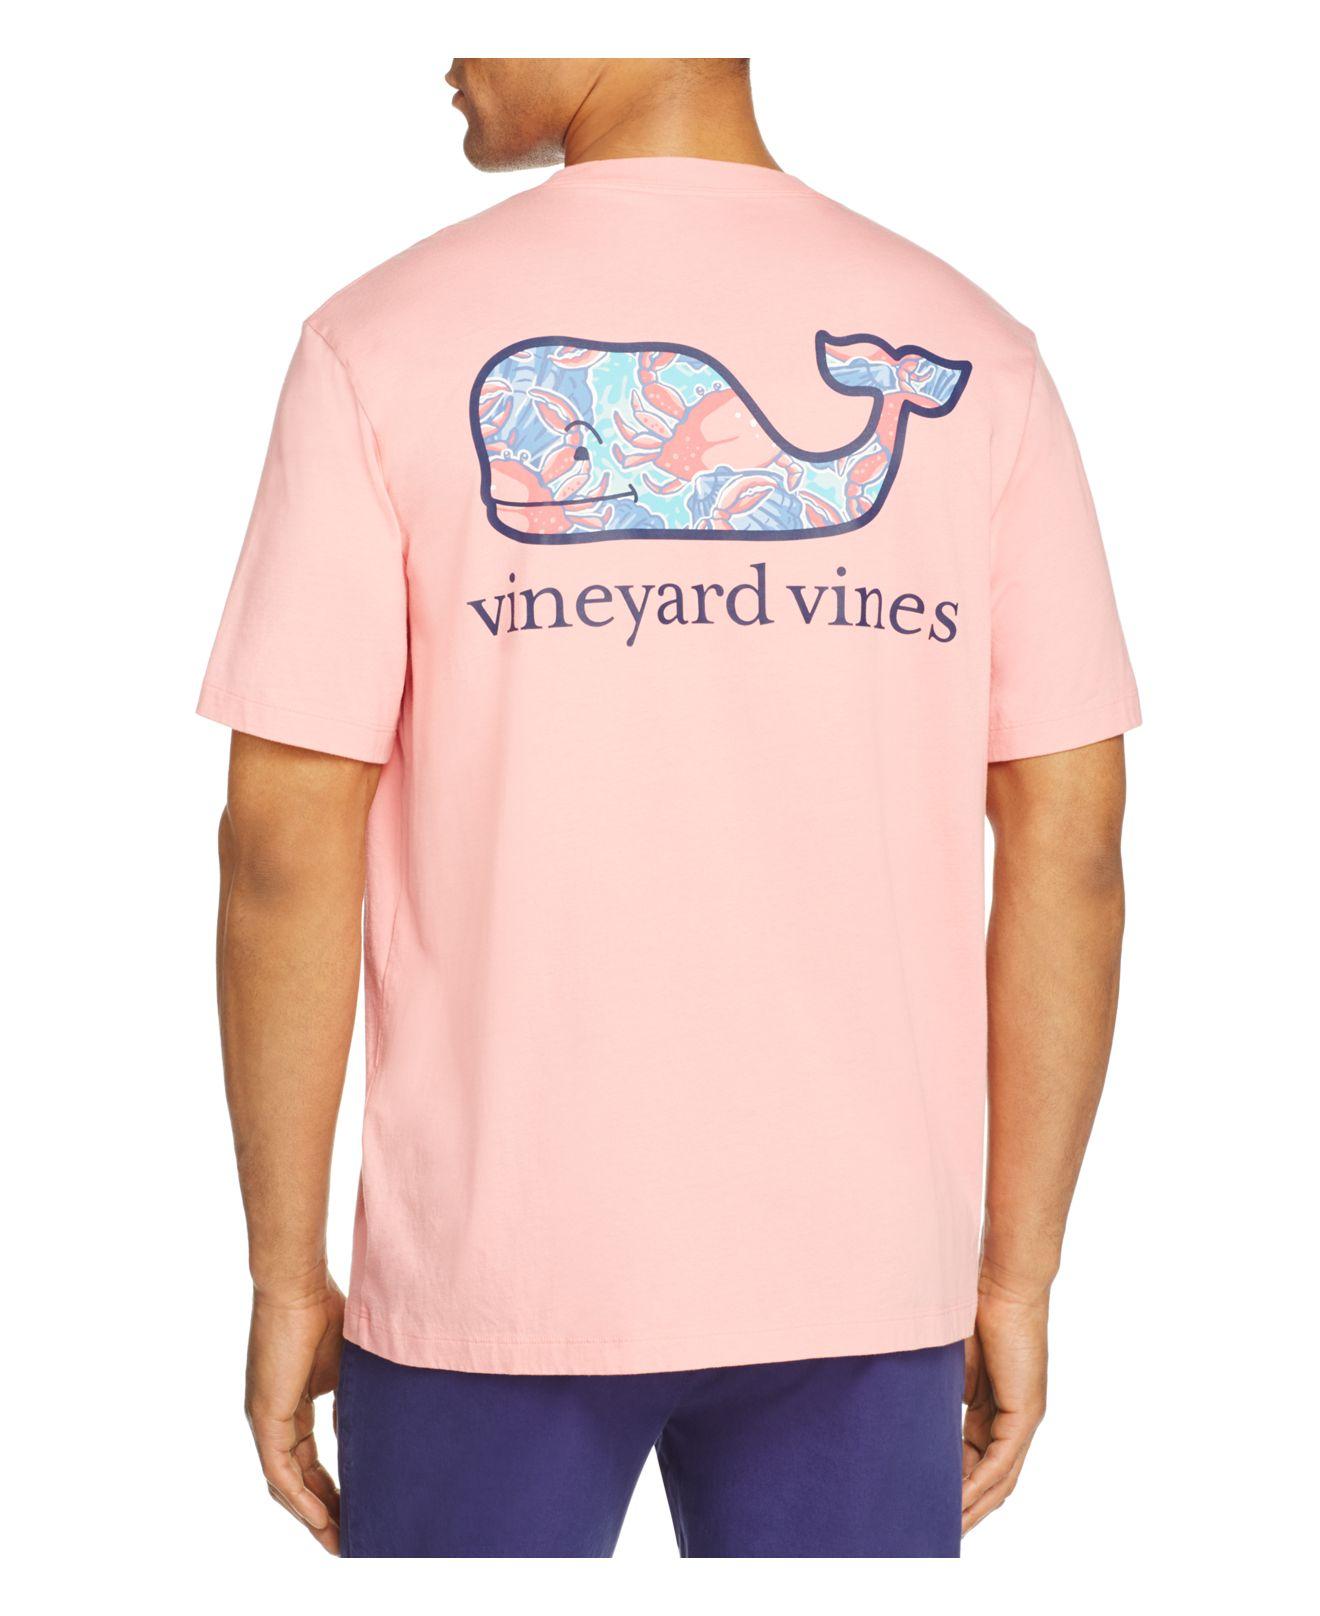 Vineyard Vines Crab Shell Whale Pocket Tee in Pink for Men - Lyst